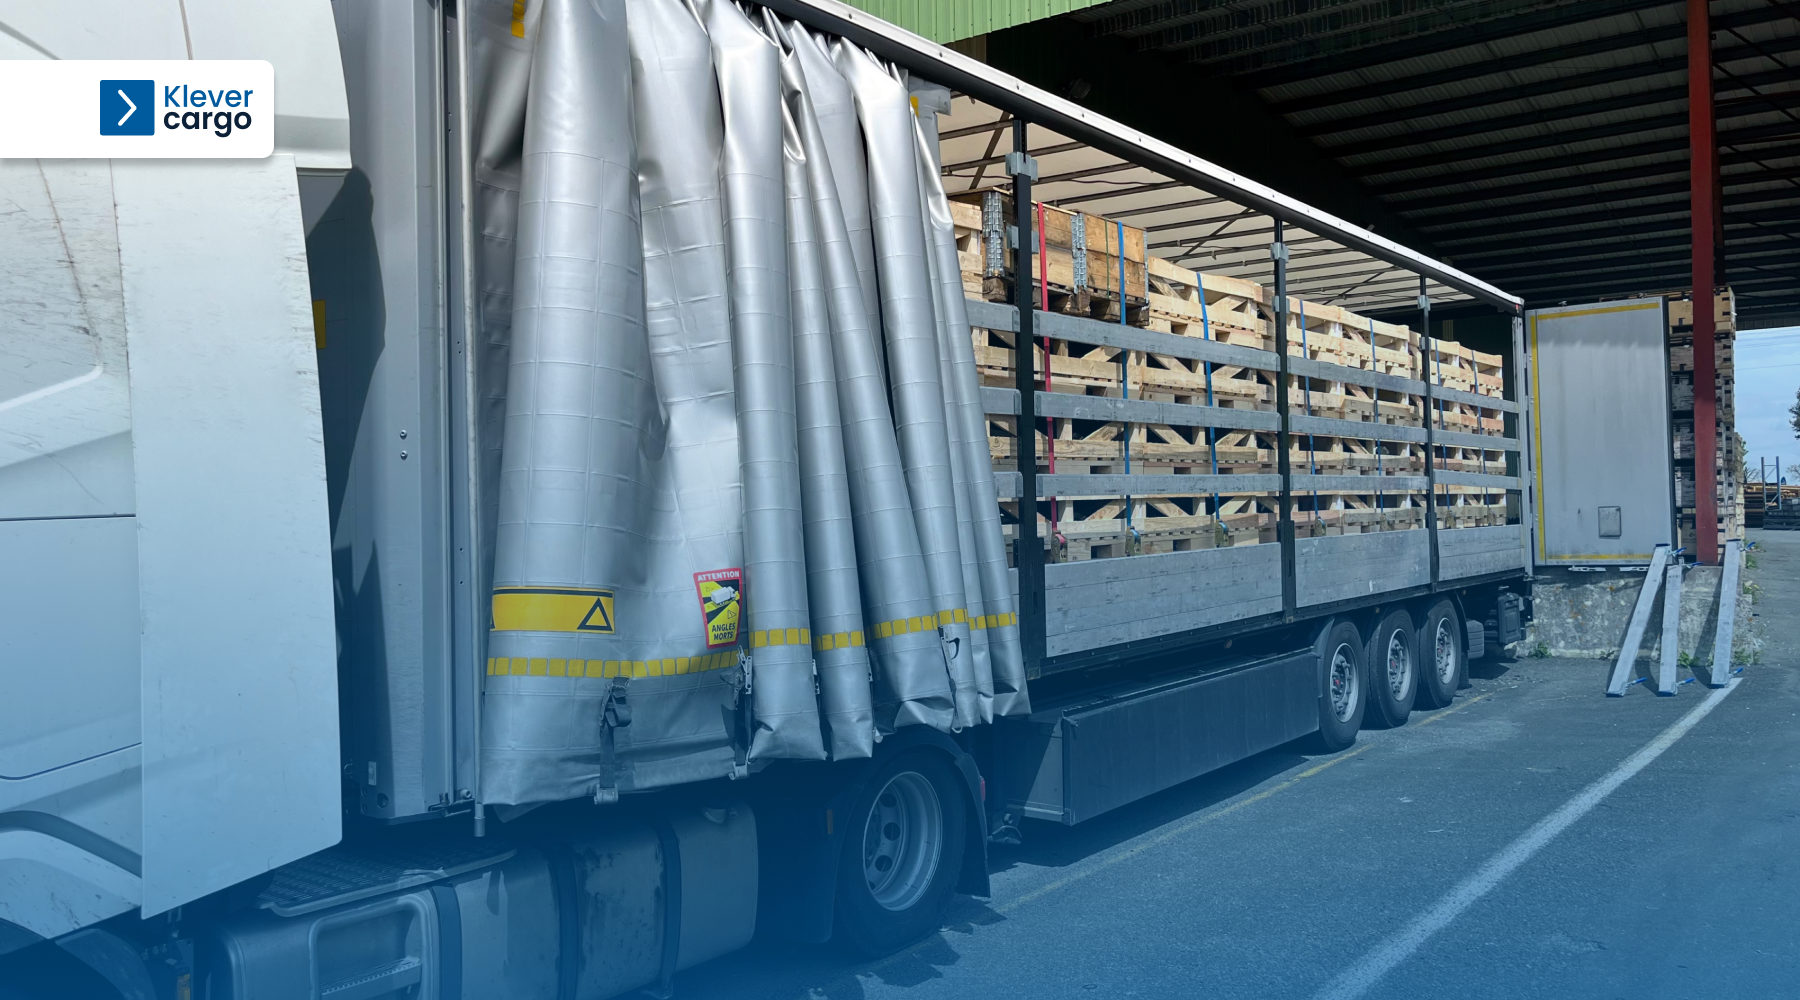 Securing and stabilising freight